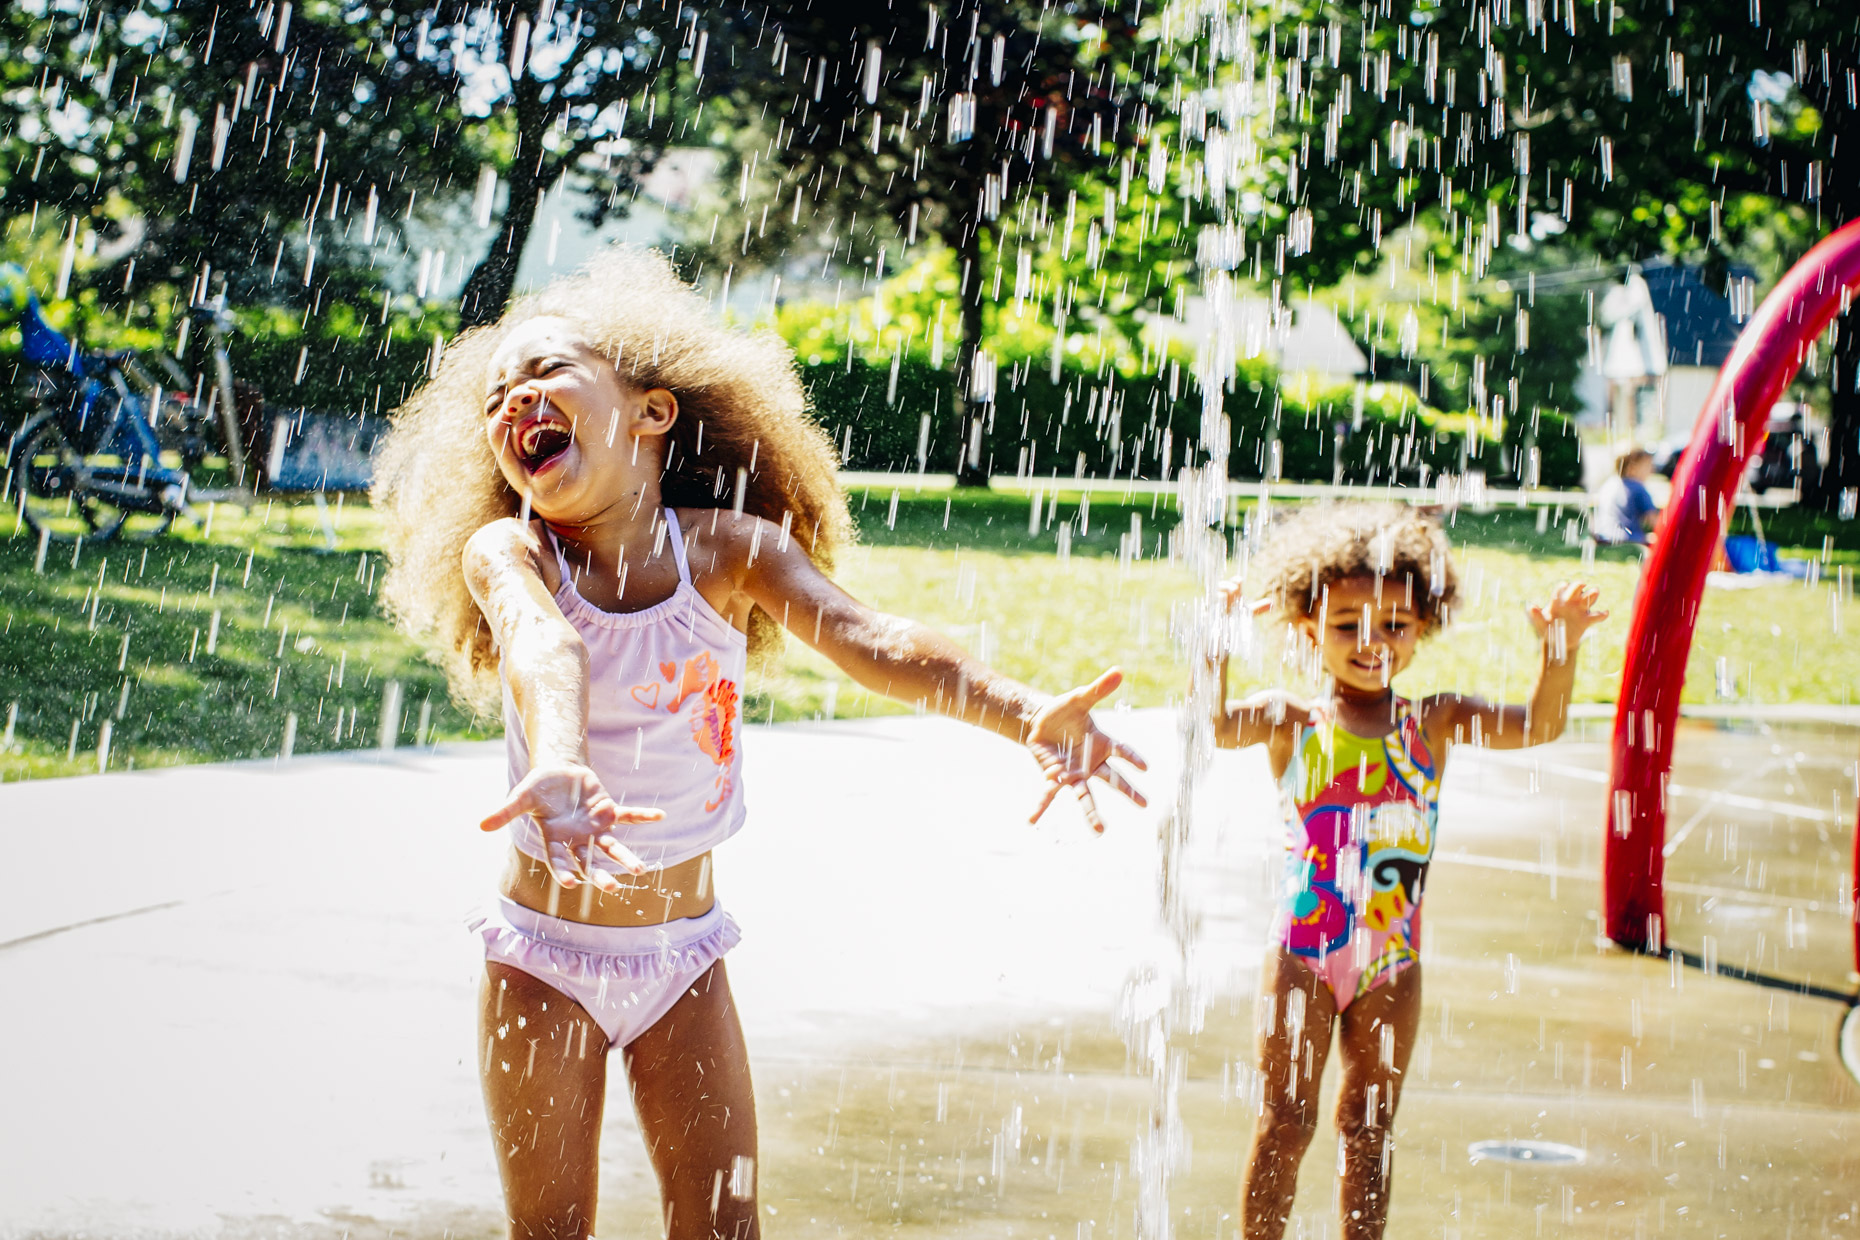 Mixed race girls with afros playing in water park